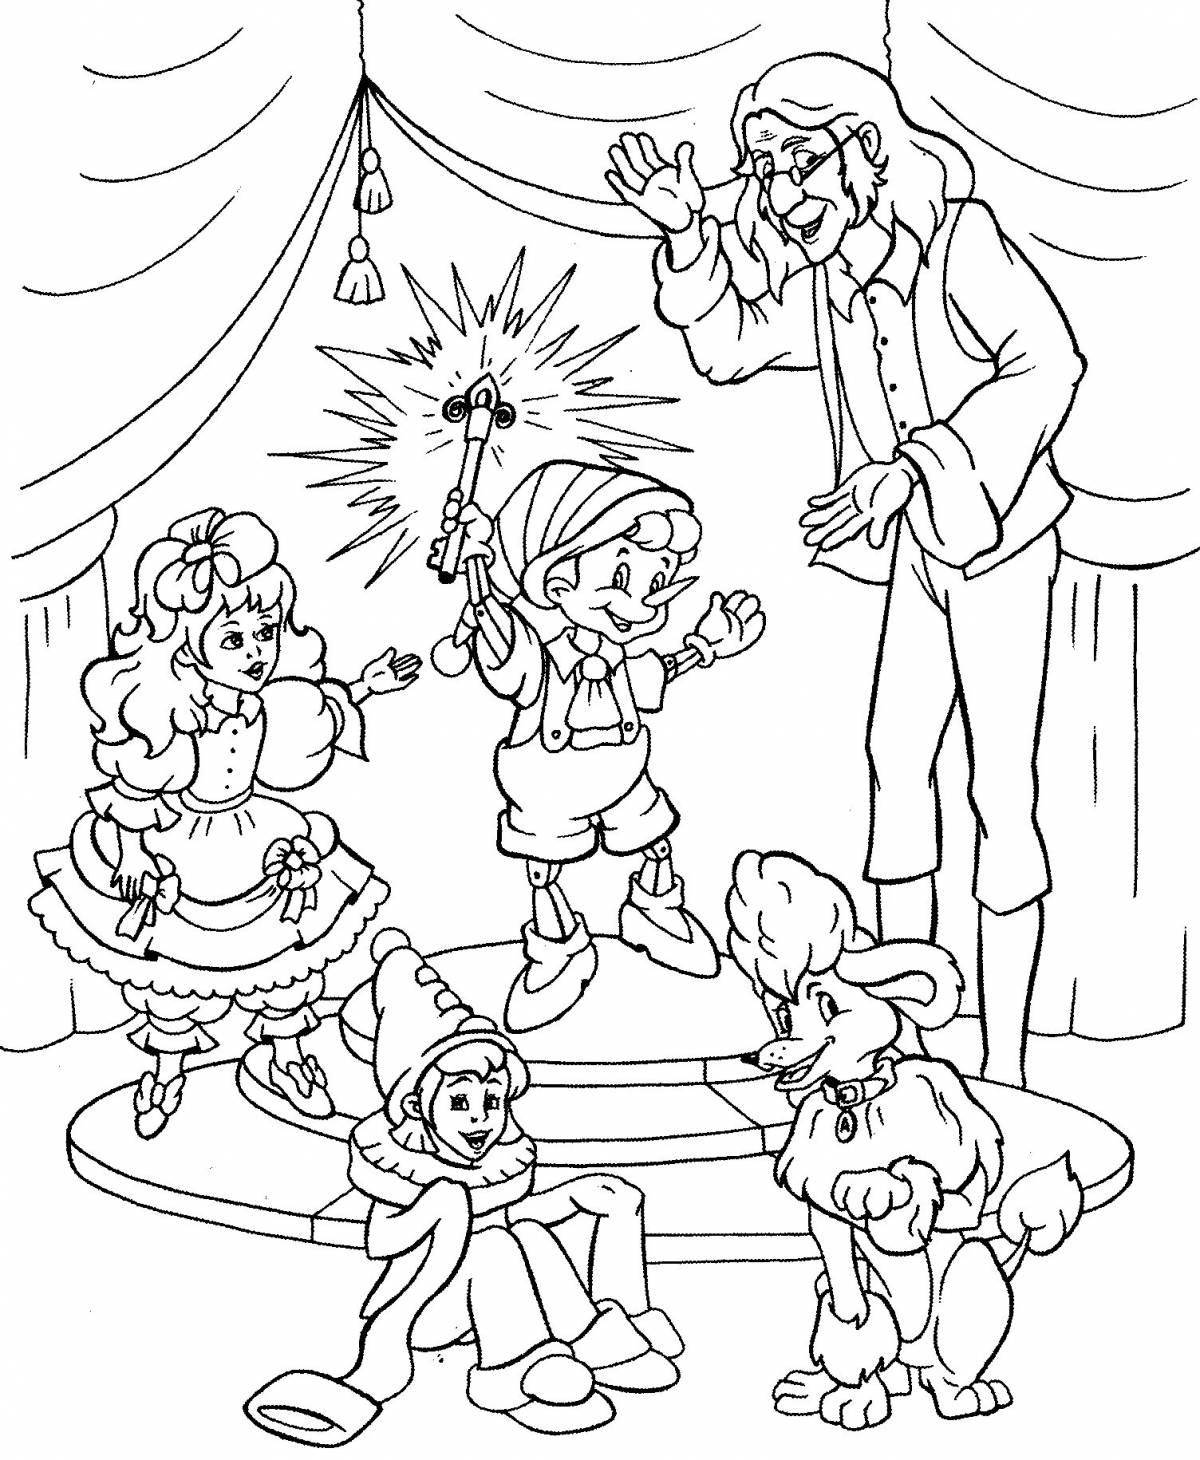 Coloring page mysterious golden key